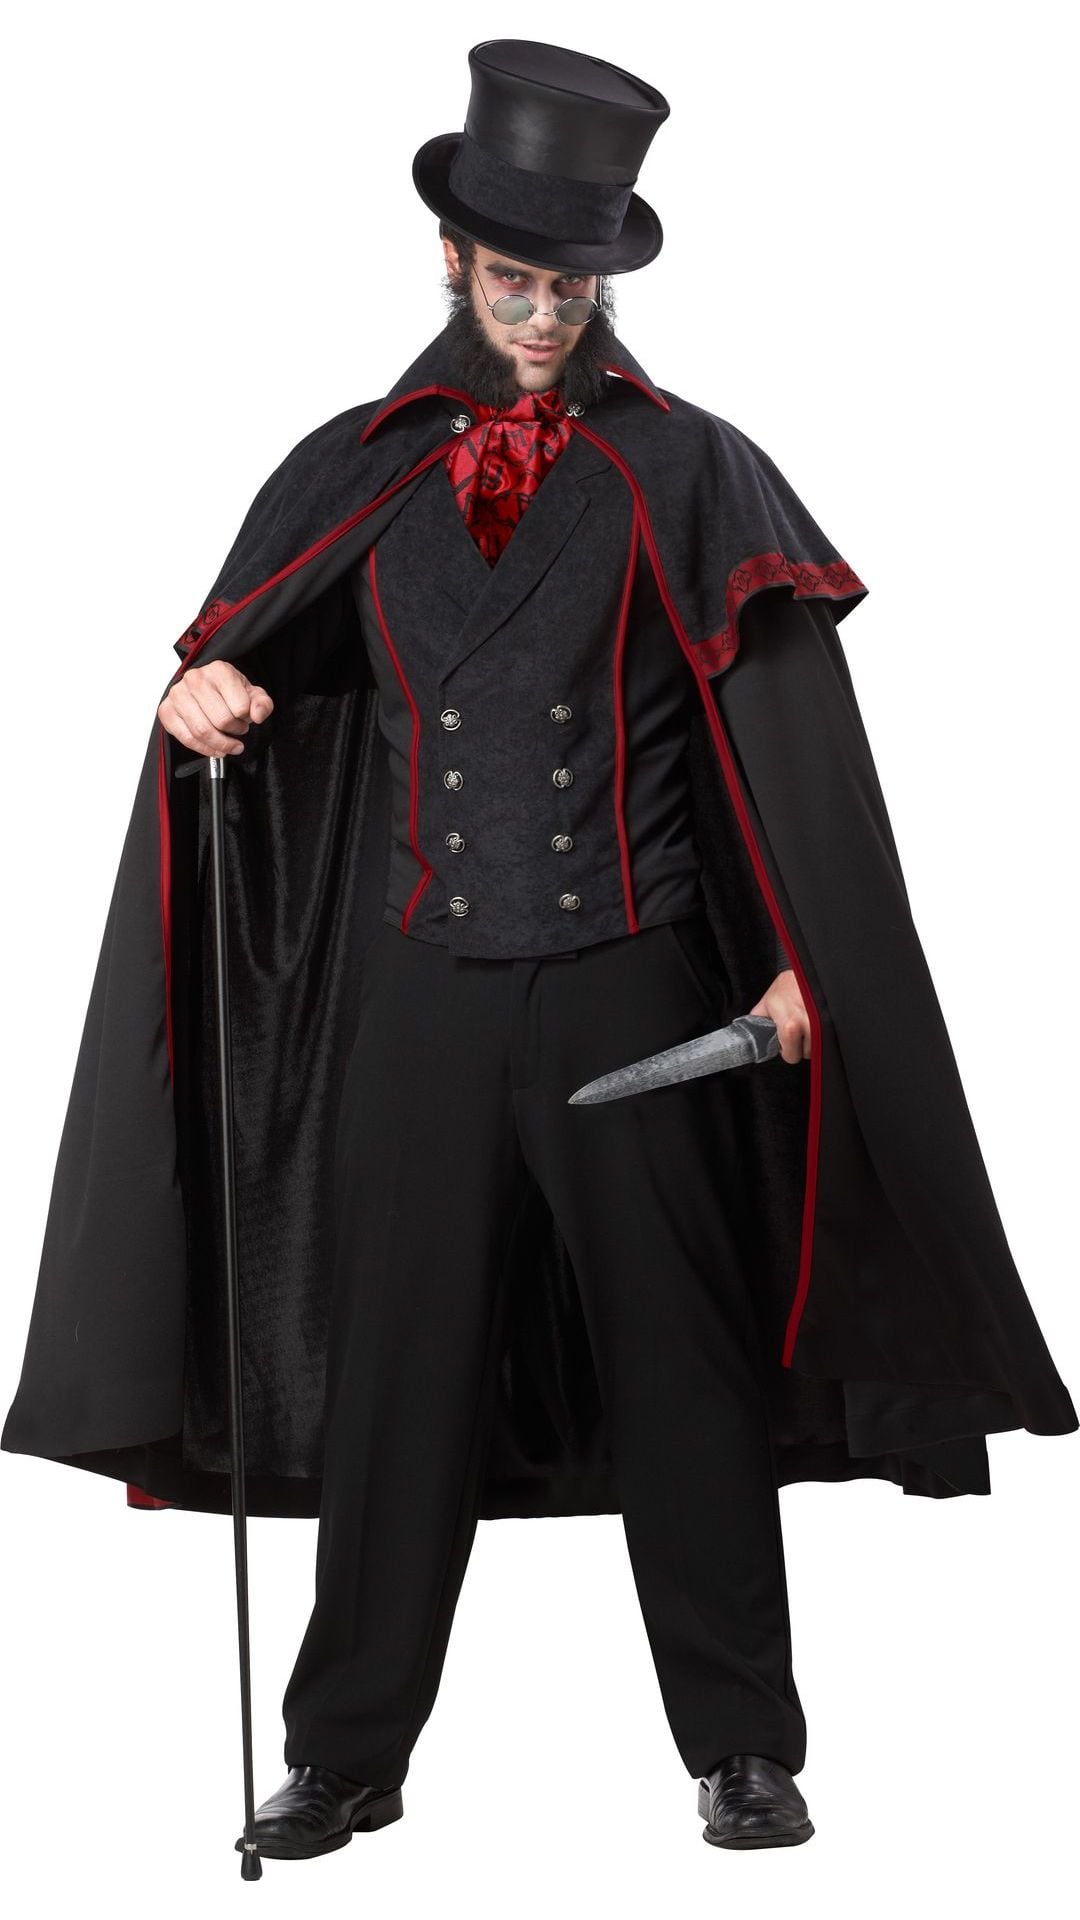 Jack the Ripper outfit